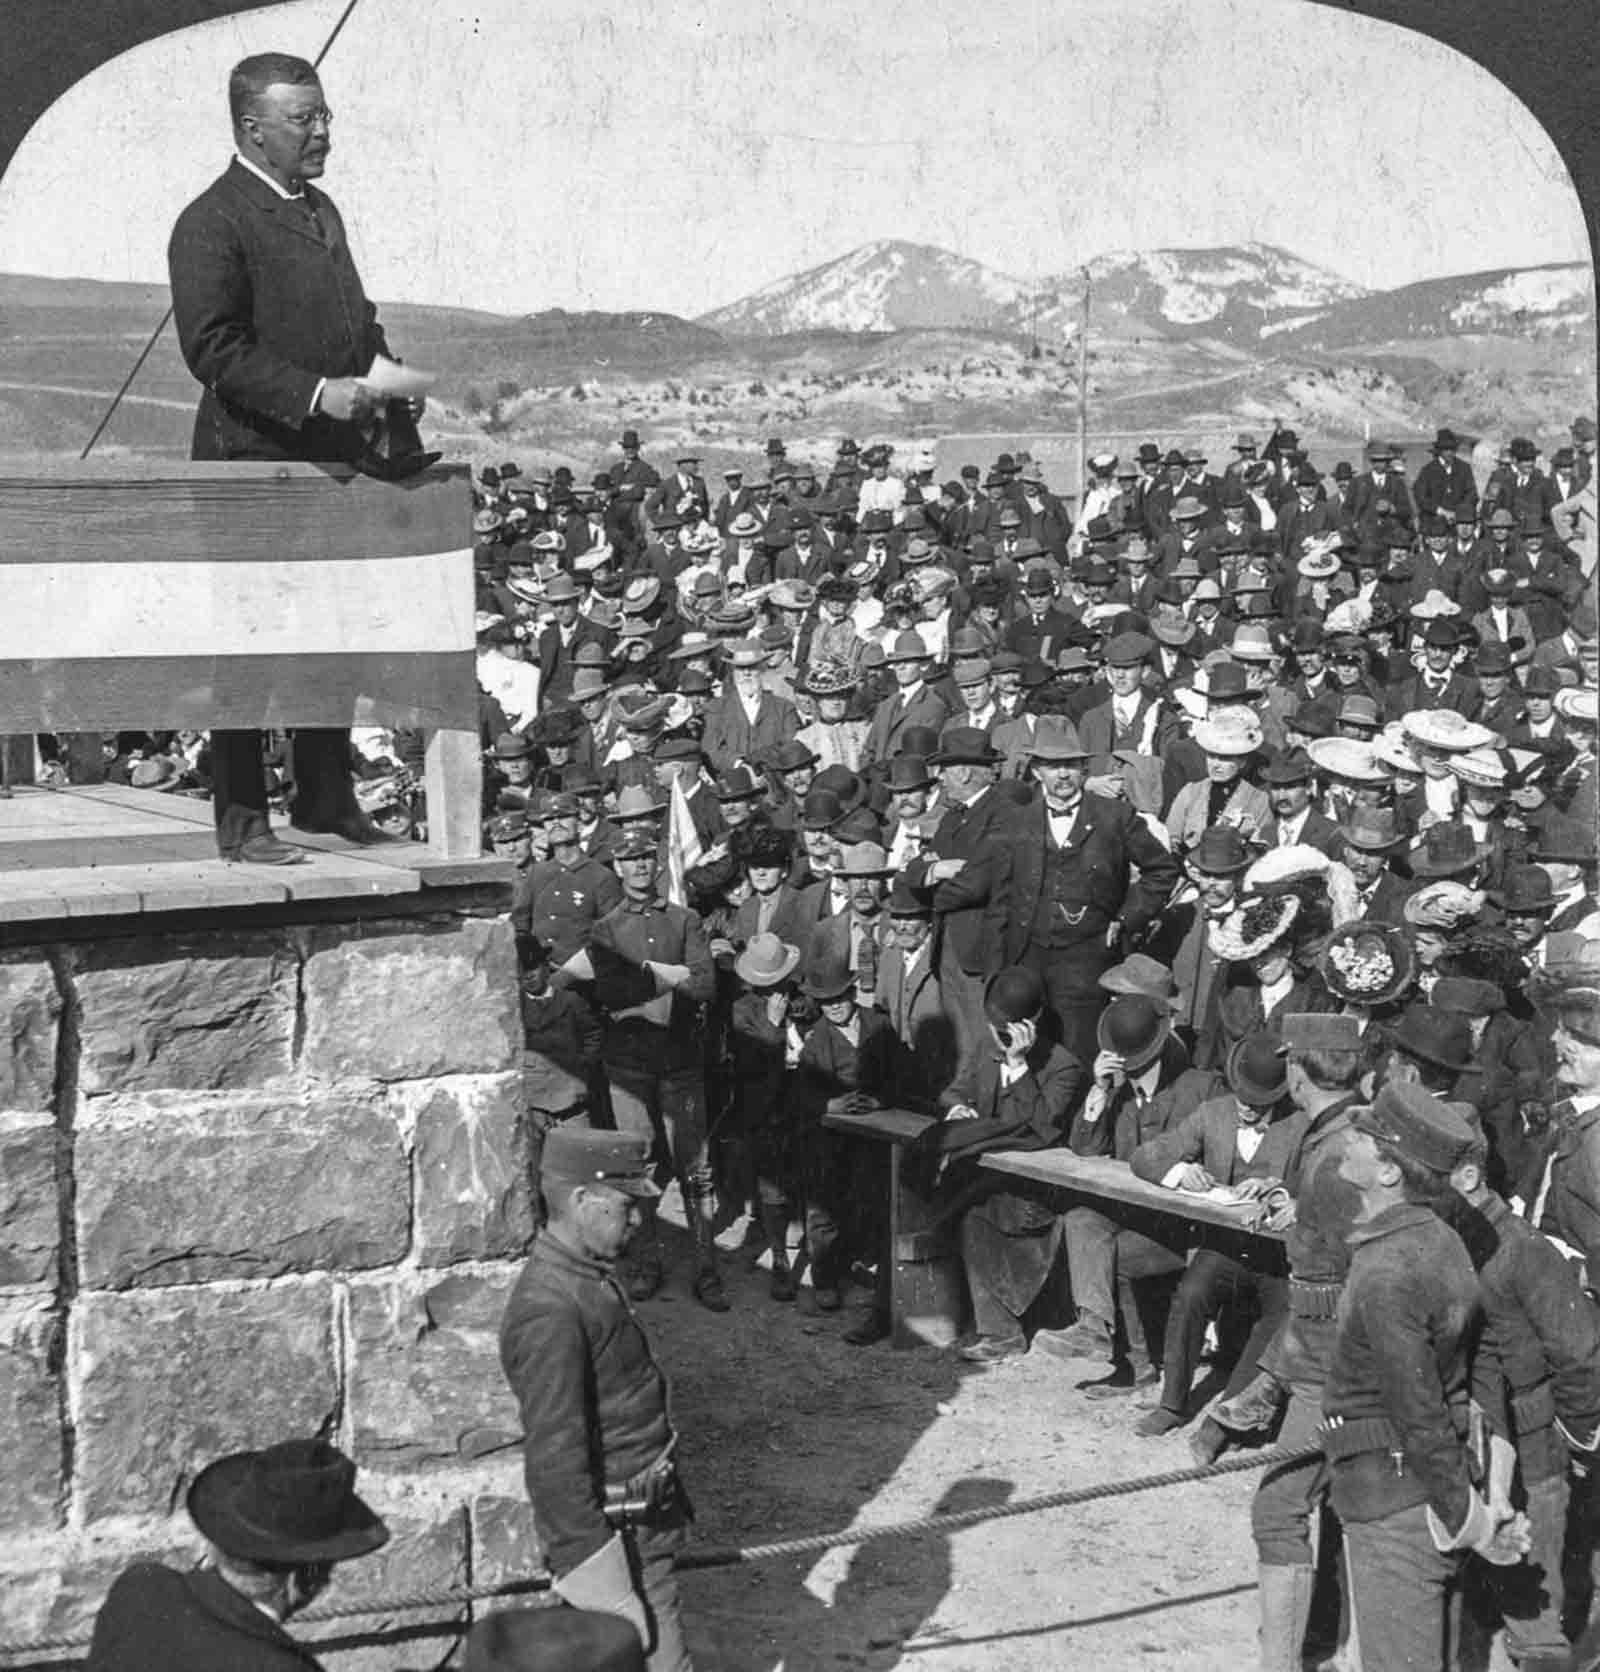 President Theodore Roosevelt addresses a crowd at the entrance to Yellowstone National Park, 1903.